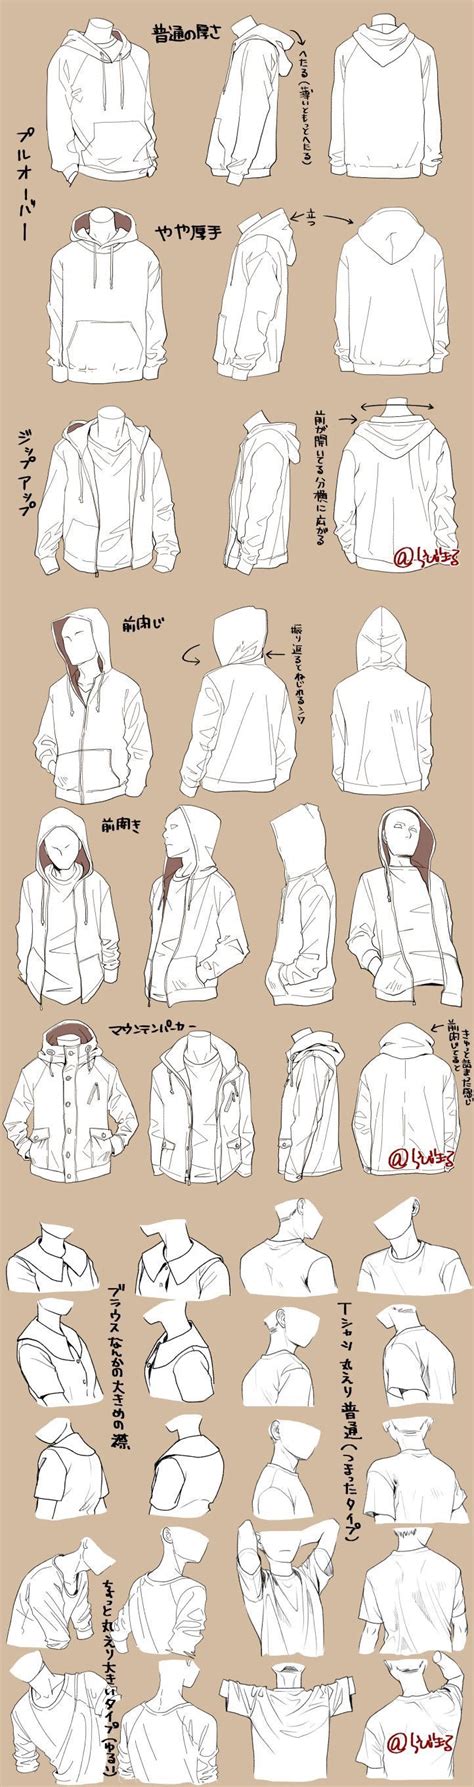 Drawing clothes art clothes character design references designs to draw draw drawings hoodie reference fashion drawing poses. Folds Hoodie Shirt - Art Tutorial , #Art #Folds #Hoodie # ...